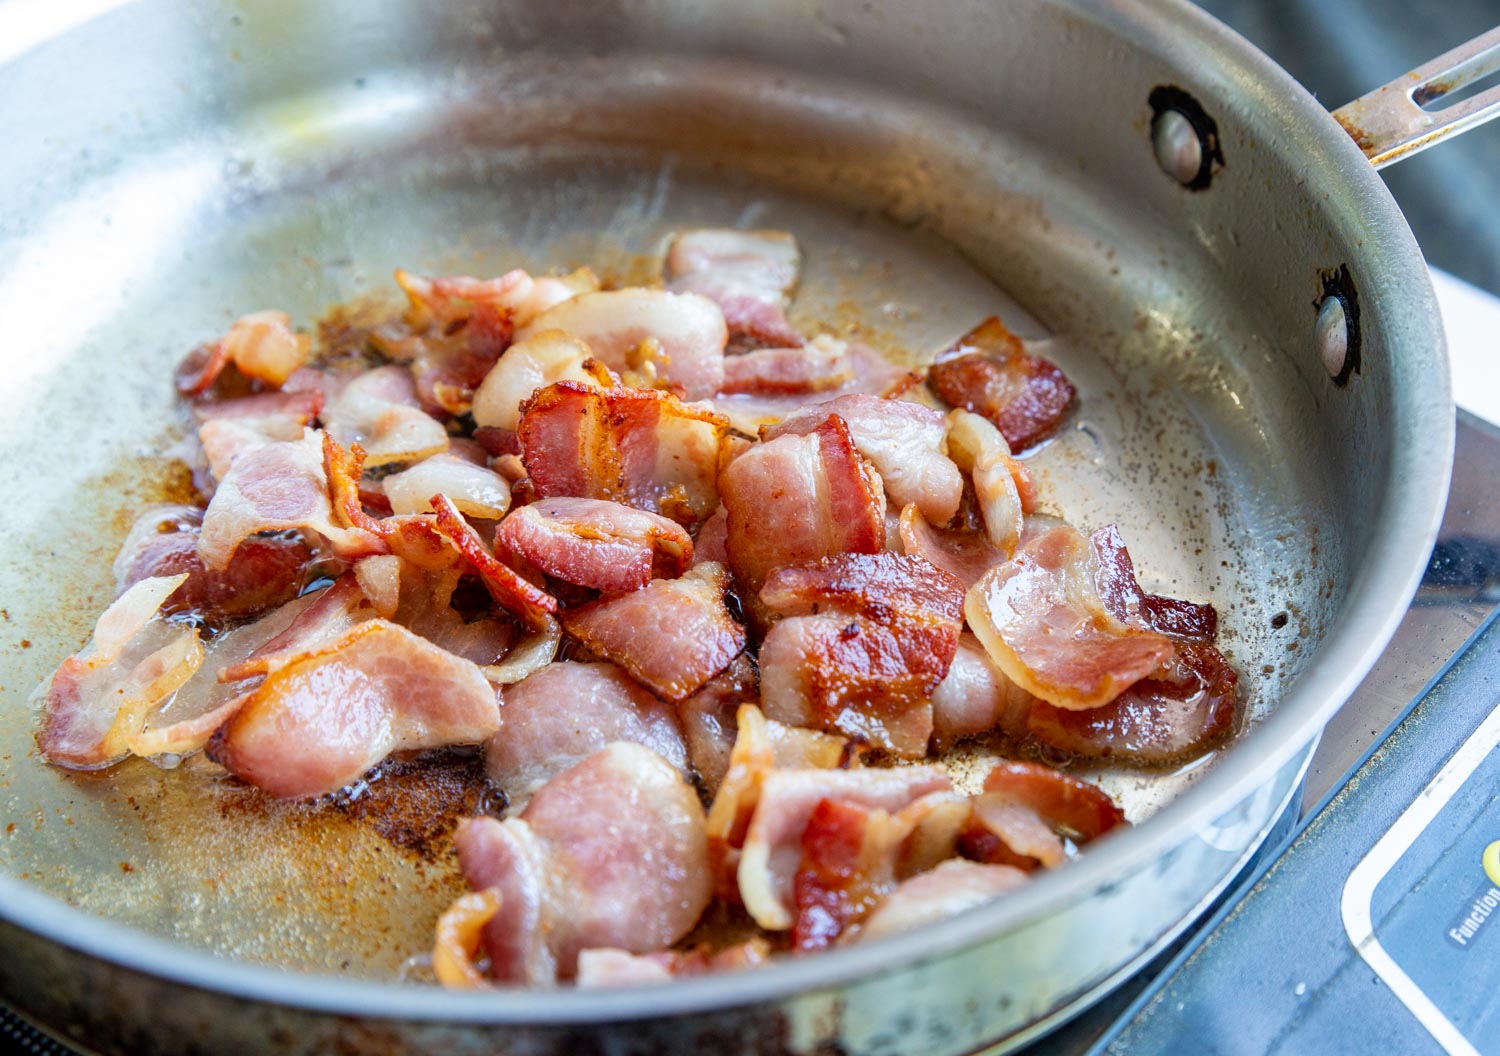 A pan full of pieces of bacon crisping up